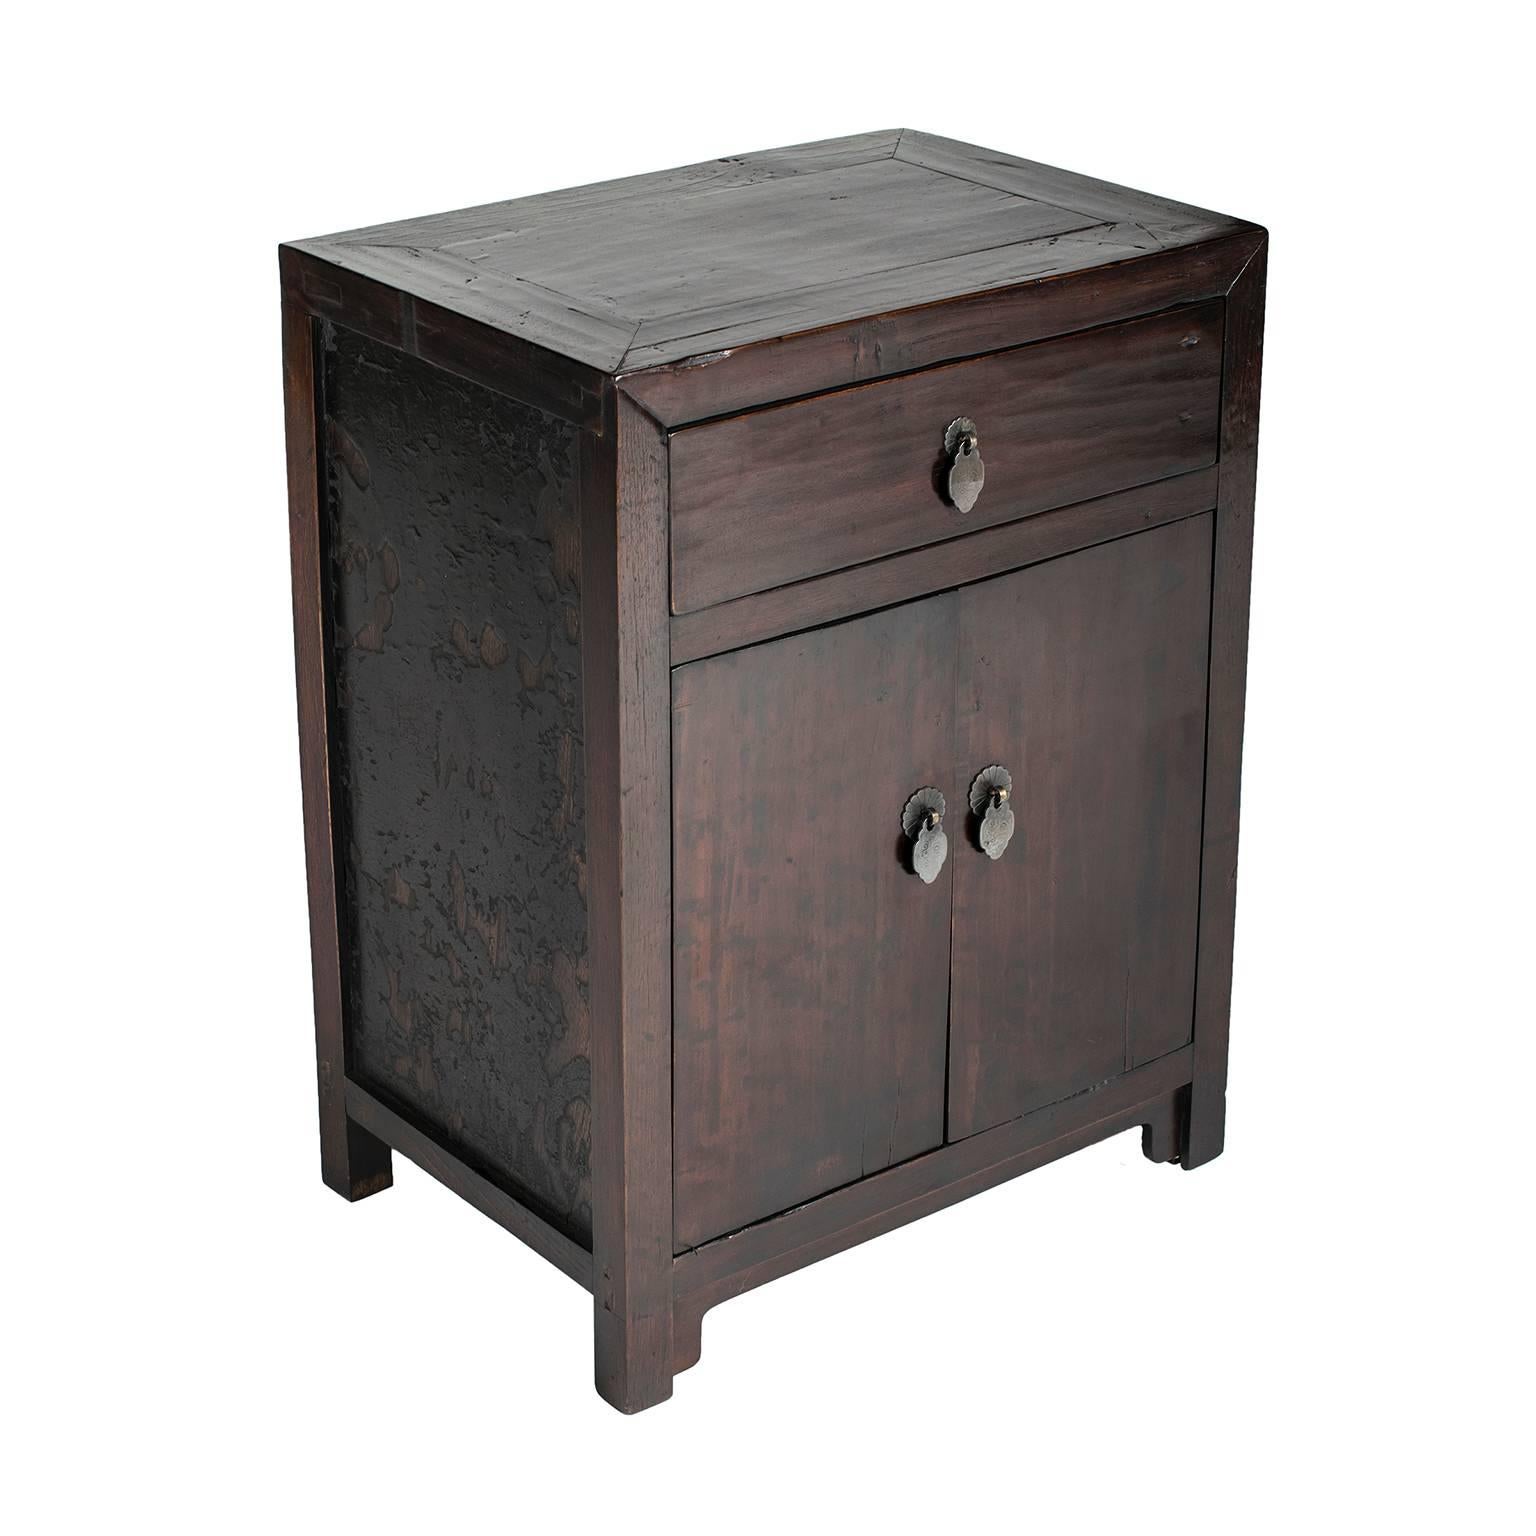 These petite cabinets have elegantly simple design with beautiful bold lines, the quality and craftsmanship is clear in the fine finish, elegant hardware and traditional mortise and tenon joinery. Traditional Chinese homes didn’t have closets so